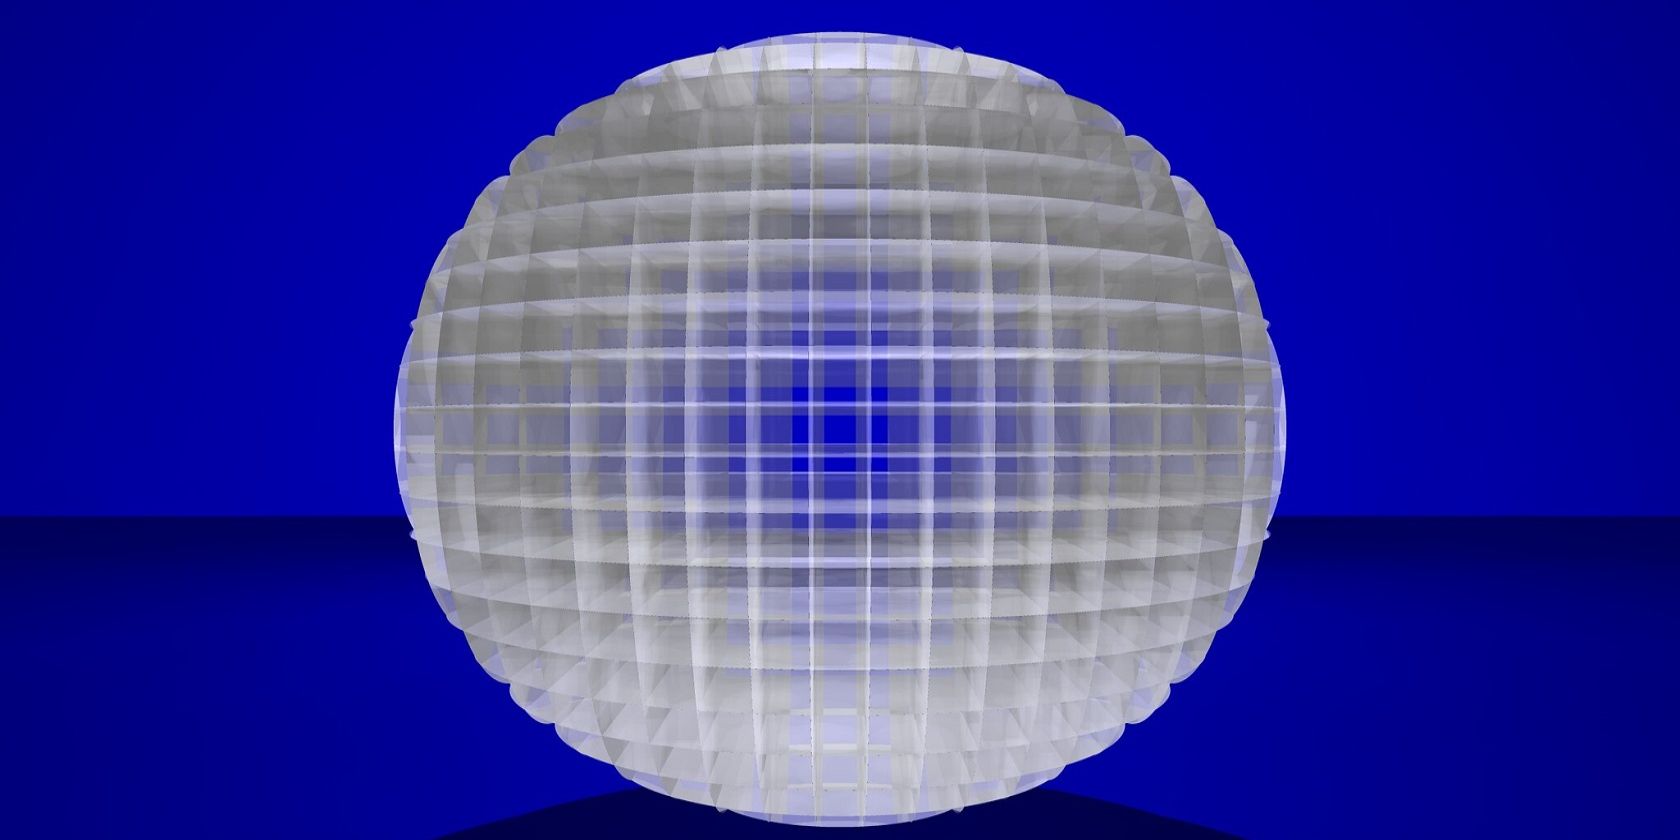 A translucent multi-faceted orb on a blue background